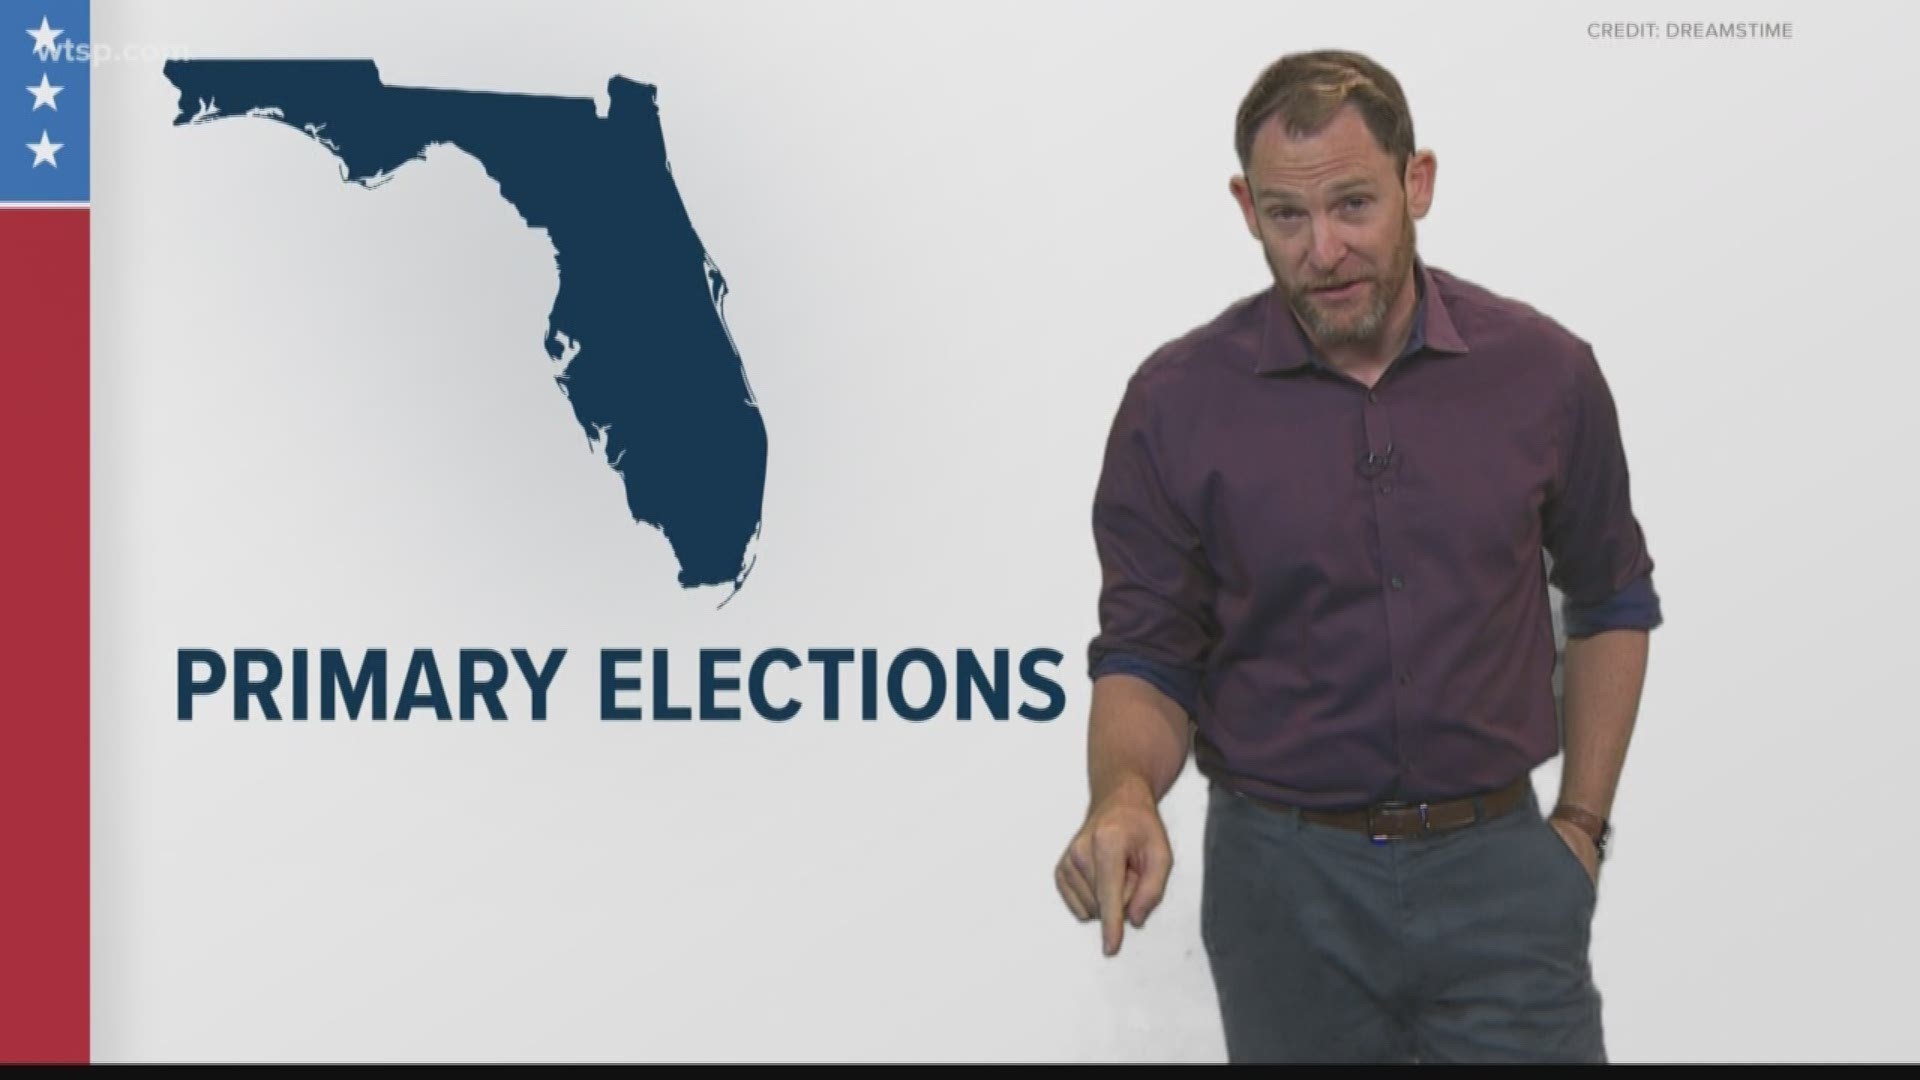 A proposed constitutional amendment would do away with Florida’s closed primary system in favor of what’s commonly known as a "jungle primary." https://on.wtsp.com/2